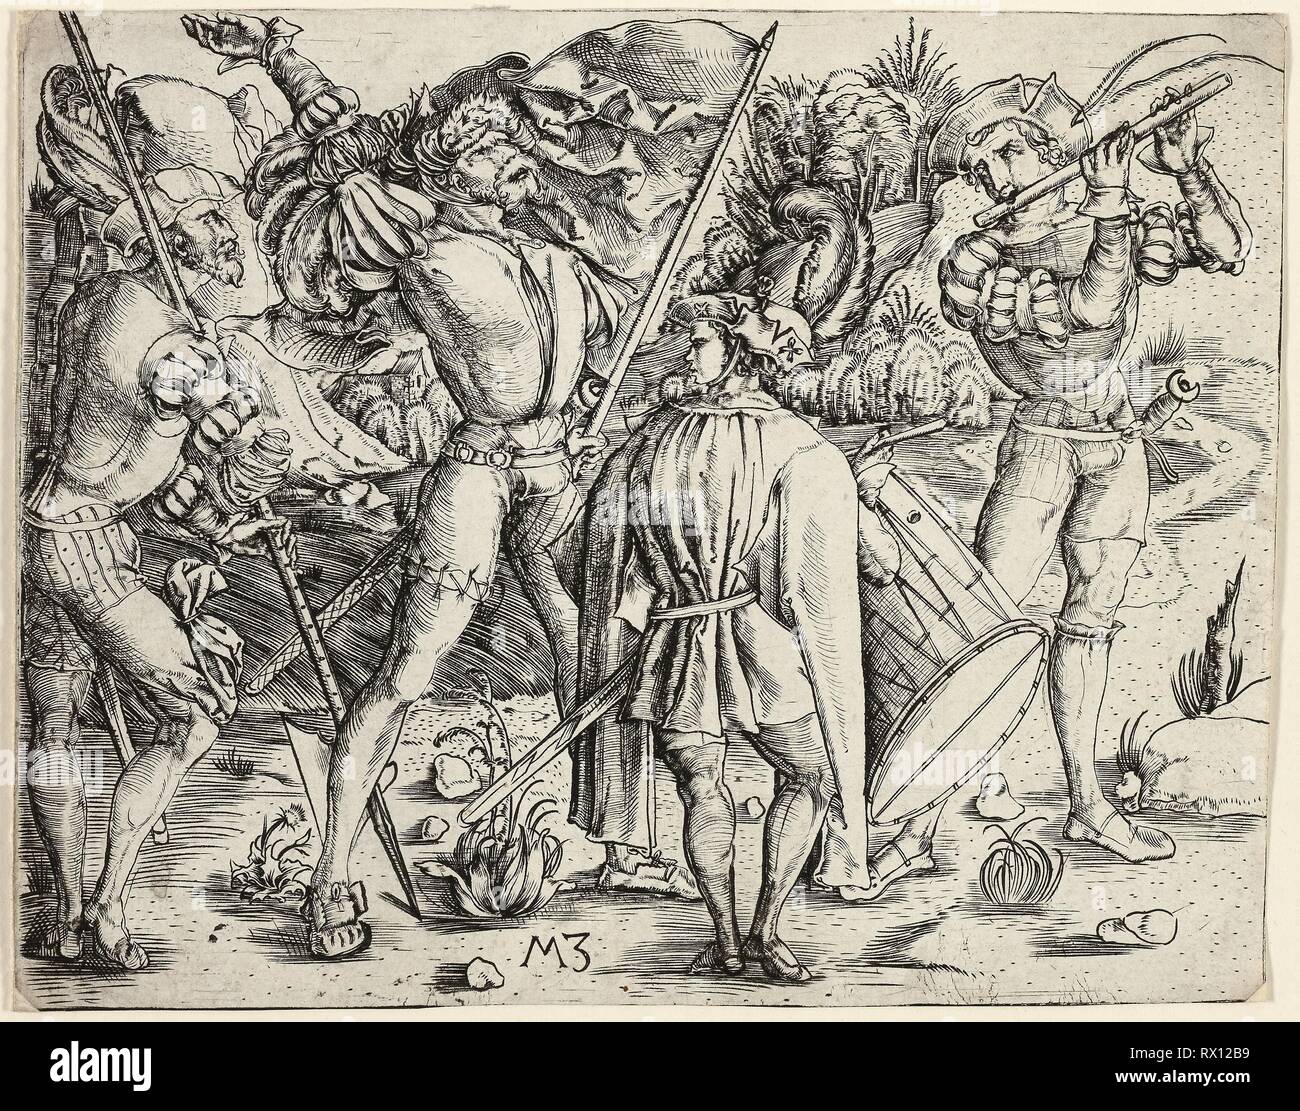 The Warriors. Master M.Z.; German, active 1500-1550. Date: 1495-1505. Dimensions: 123 × 153 mm (sheet trimmed within plate mark). Engraving in black on ivory laid paper. Origin: Germany. Museum: The Chicago Art Institute. Stock Photo